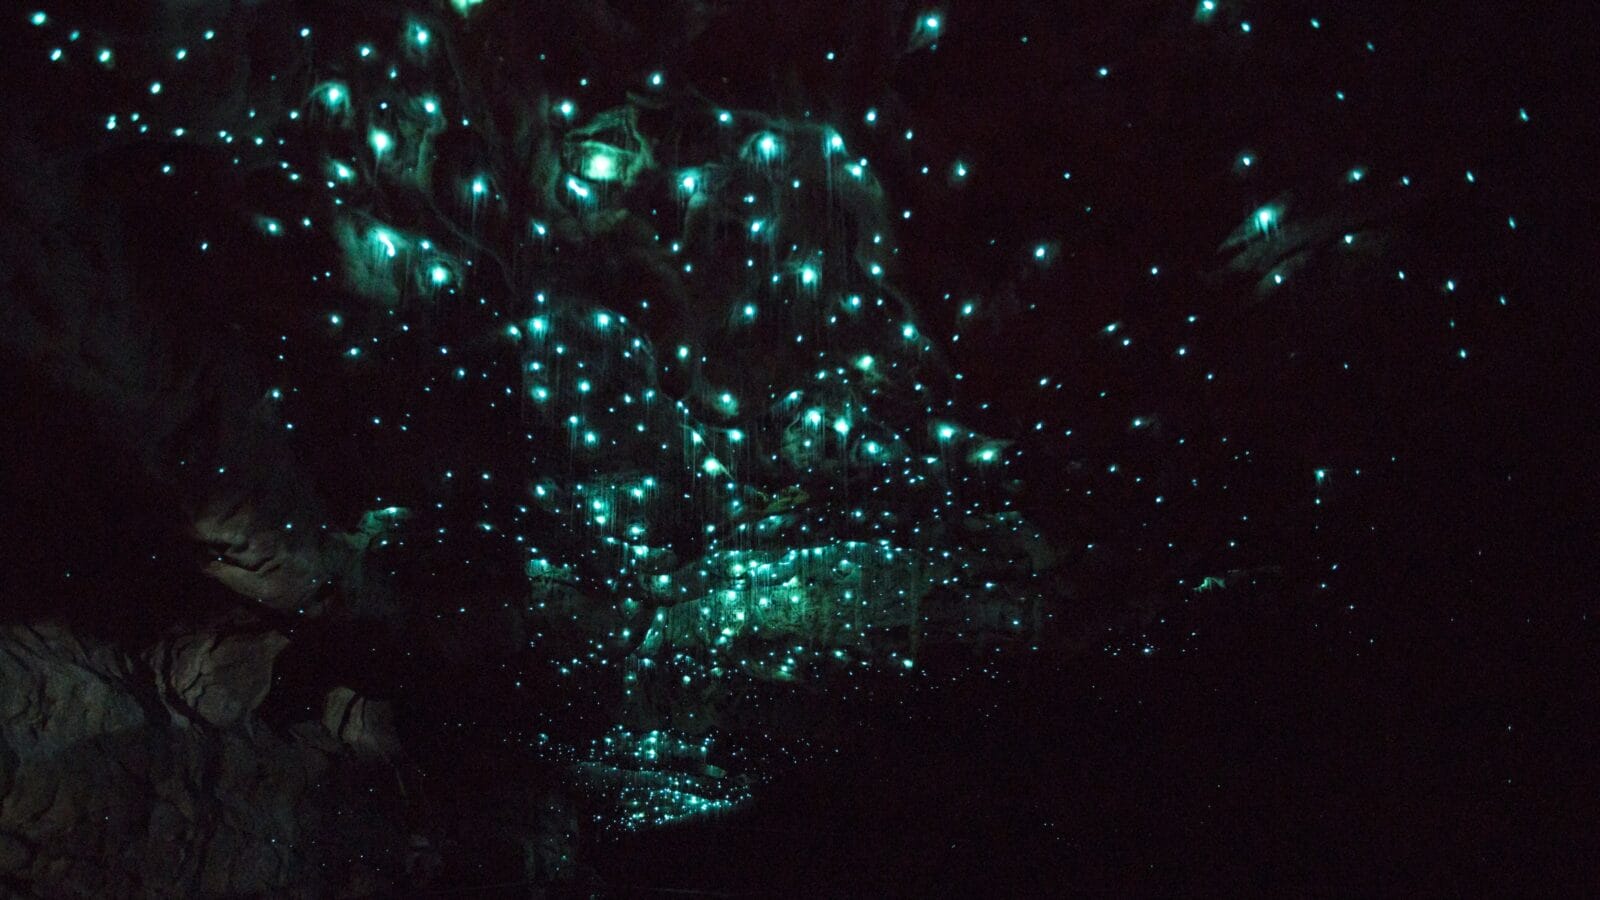 <p>Glowworms everywhere you look are one of the top reasons the cleverly named Waitomo ‘Glowworm’ Caves attract visitors worldwide. Located on New Zealand’s North Island, these magnificent caves are magical thanks to the presence of fluorescent fauna and fun activities like rafting.</p><p>As you descend into Waitomo caves via a spiral stair entrance, you’ll be met with a subterranean world like no other. With or without the cool-looking worms, the destination is a worthy contender that offers plenty of geological marvels like underground waterfalls.</p>